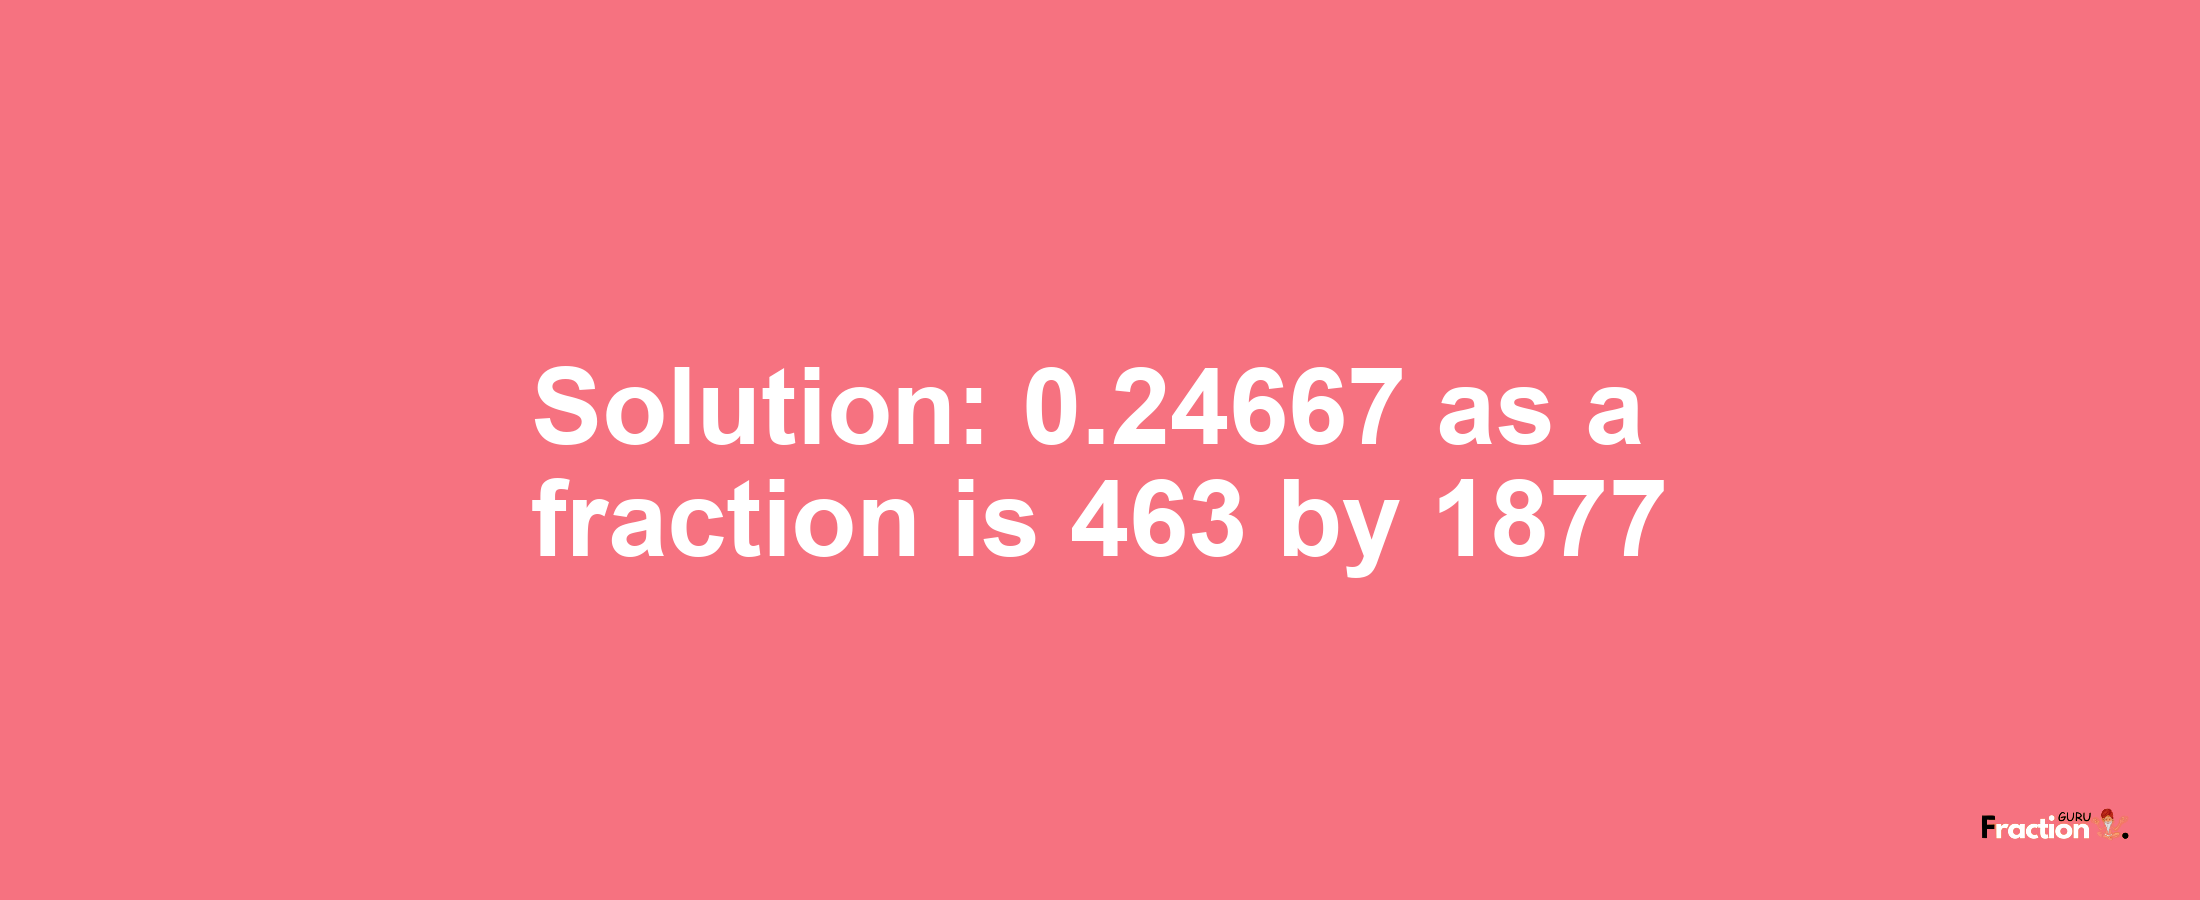 Solution:0.24667 as a fraction is 463/1877